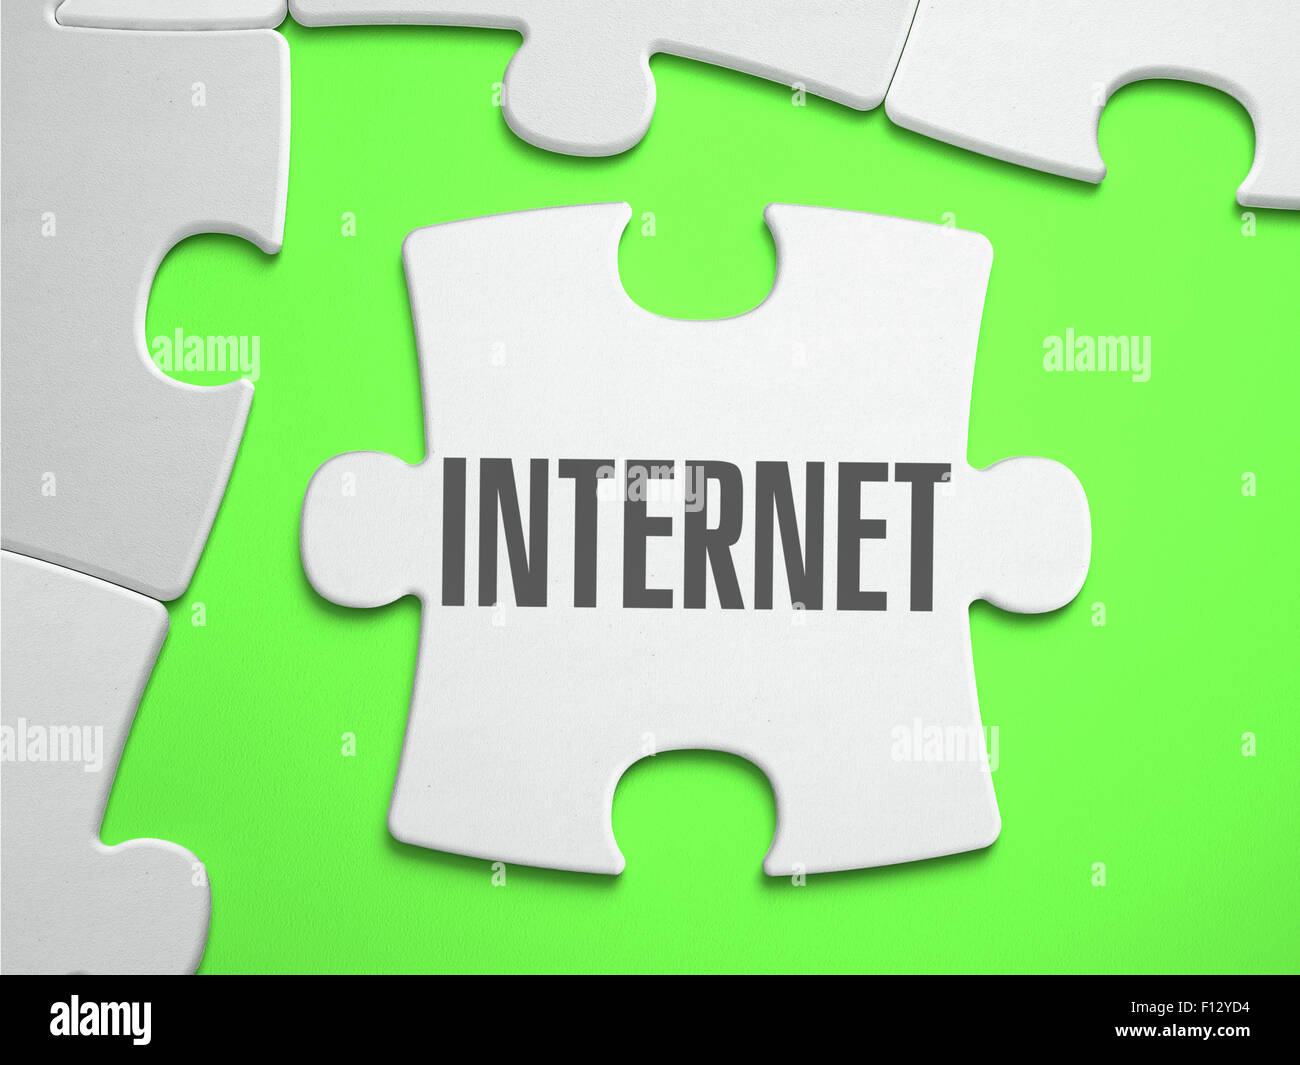 Internet - Jigsaw Puzzle with Missing Pieces. Stock Photo